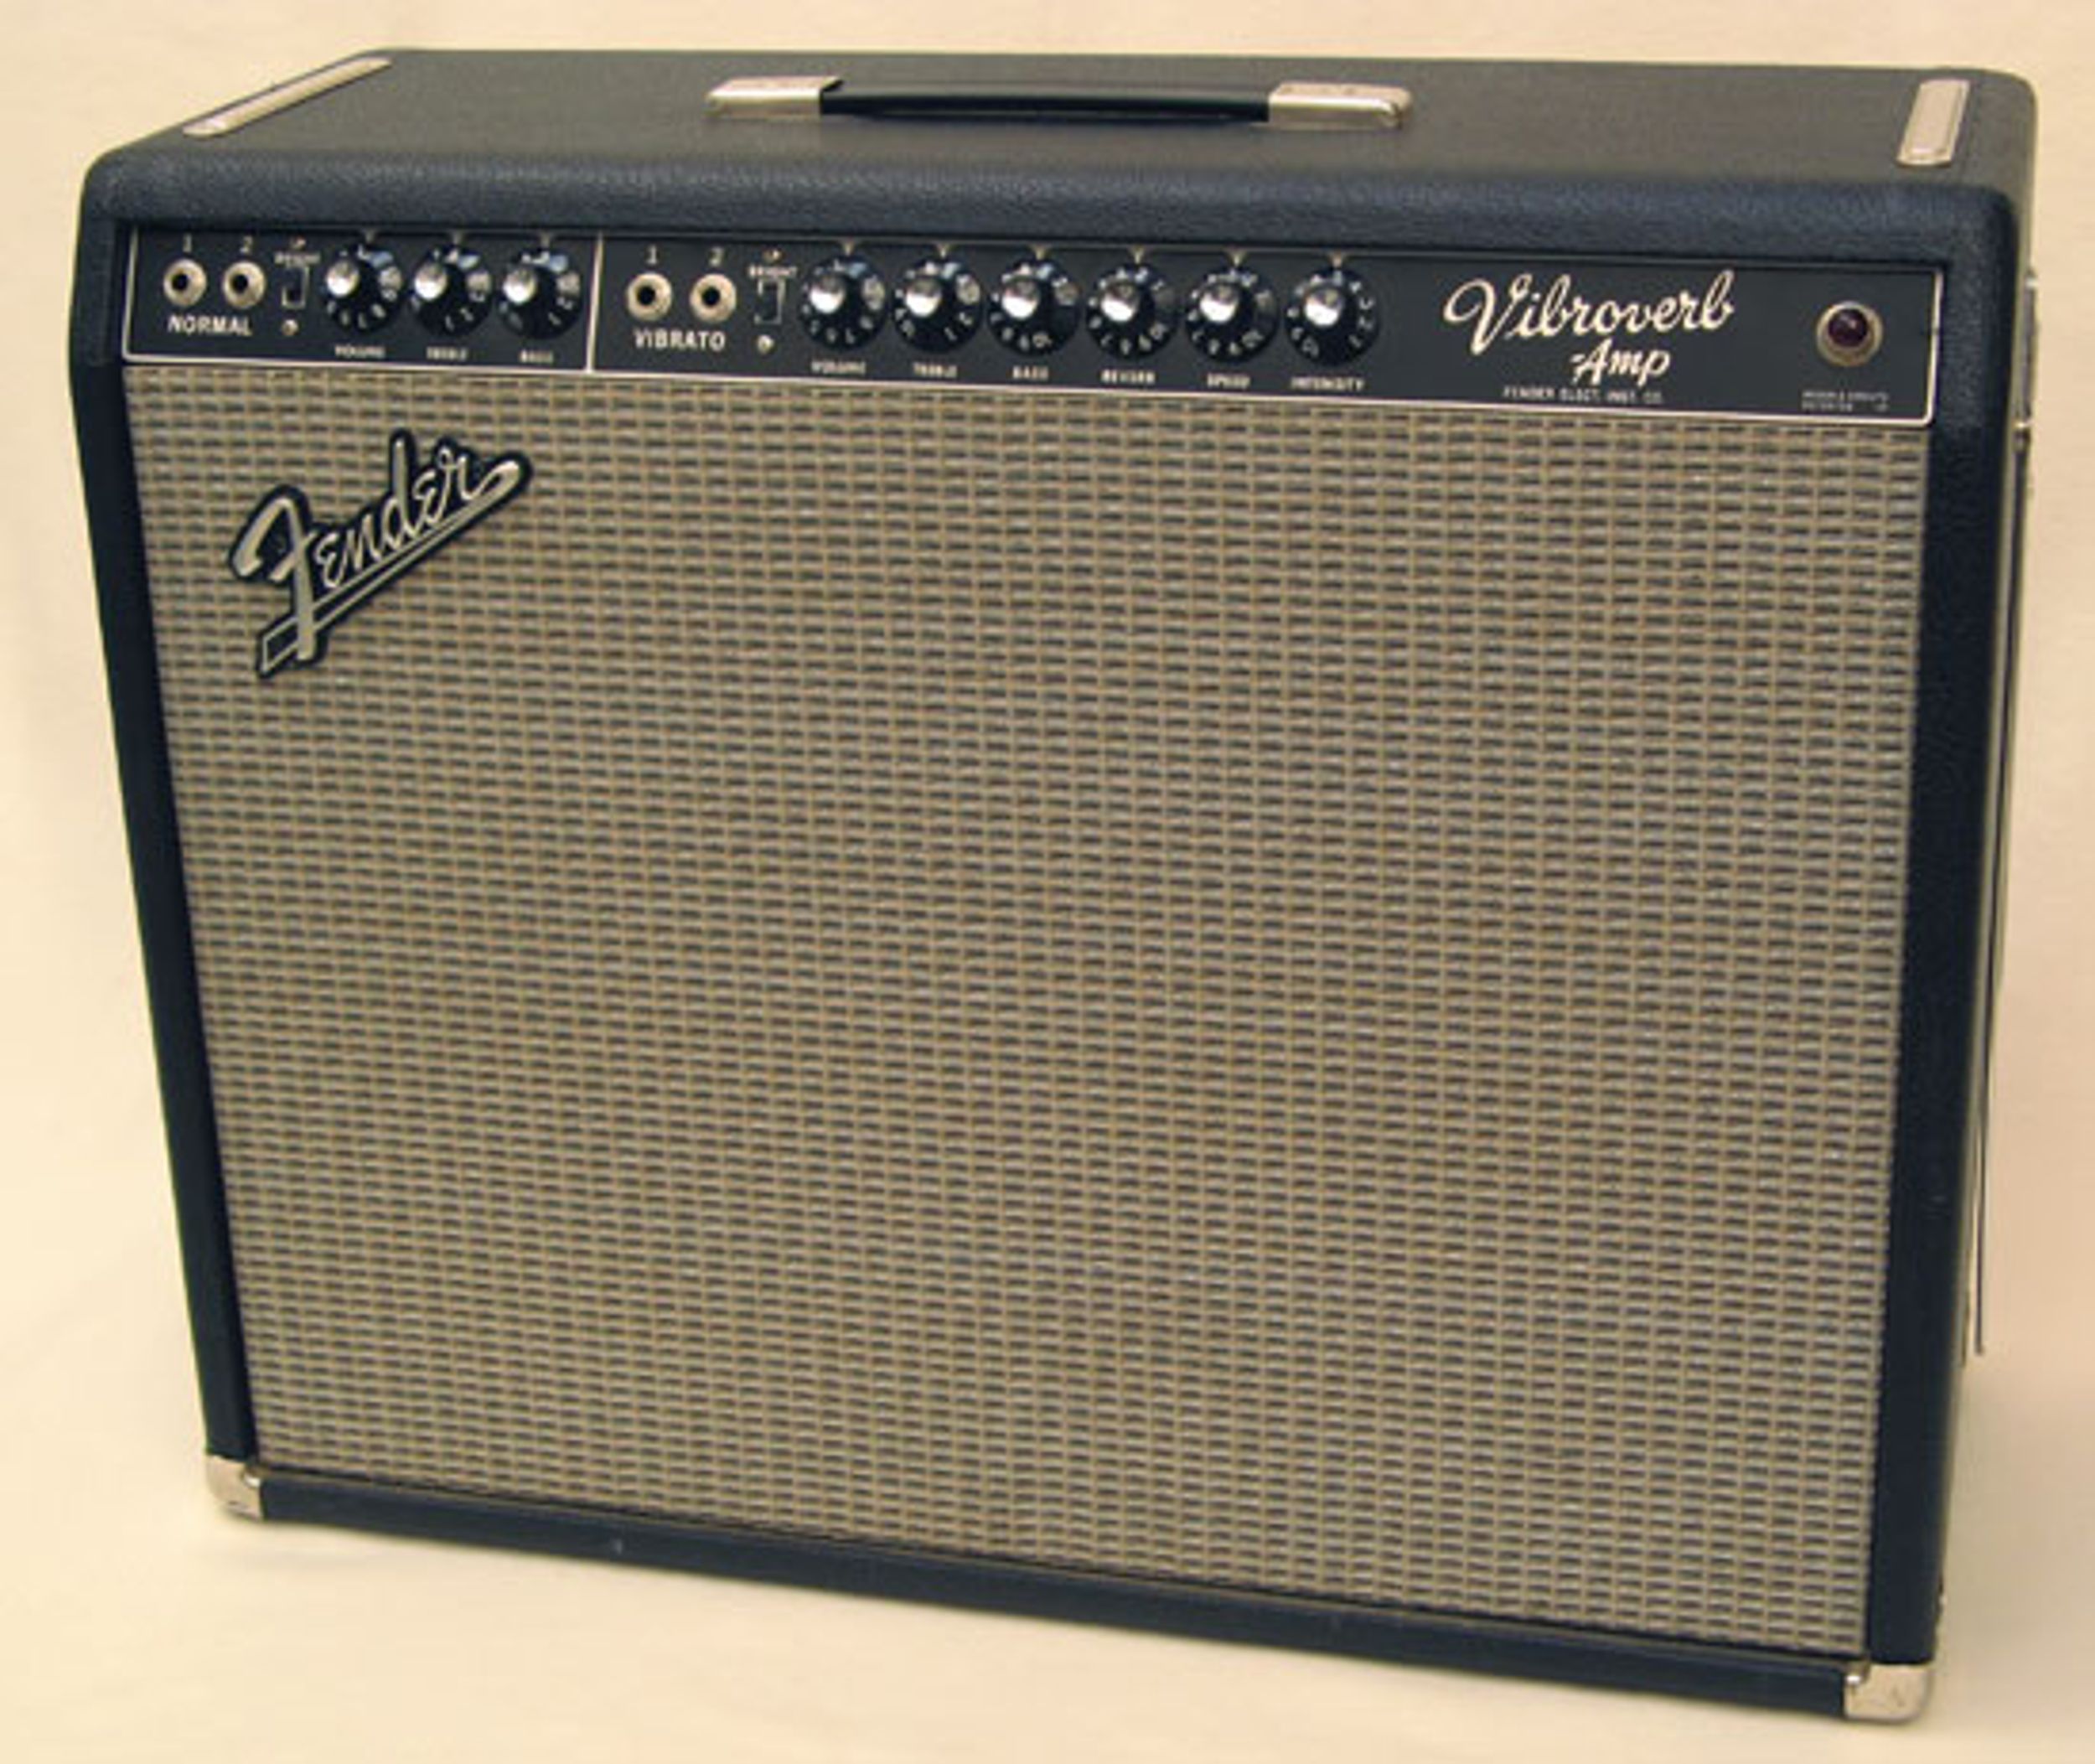 Gear of the Month: 1964 Fender Vibroverb